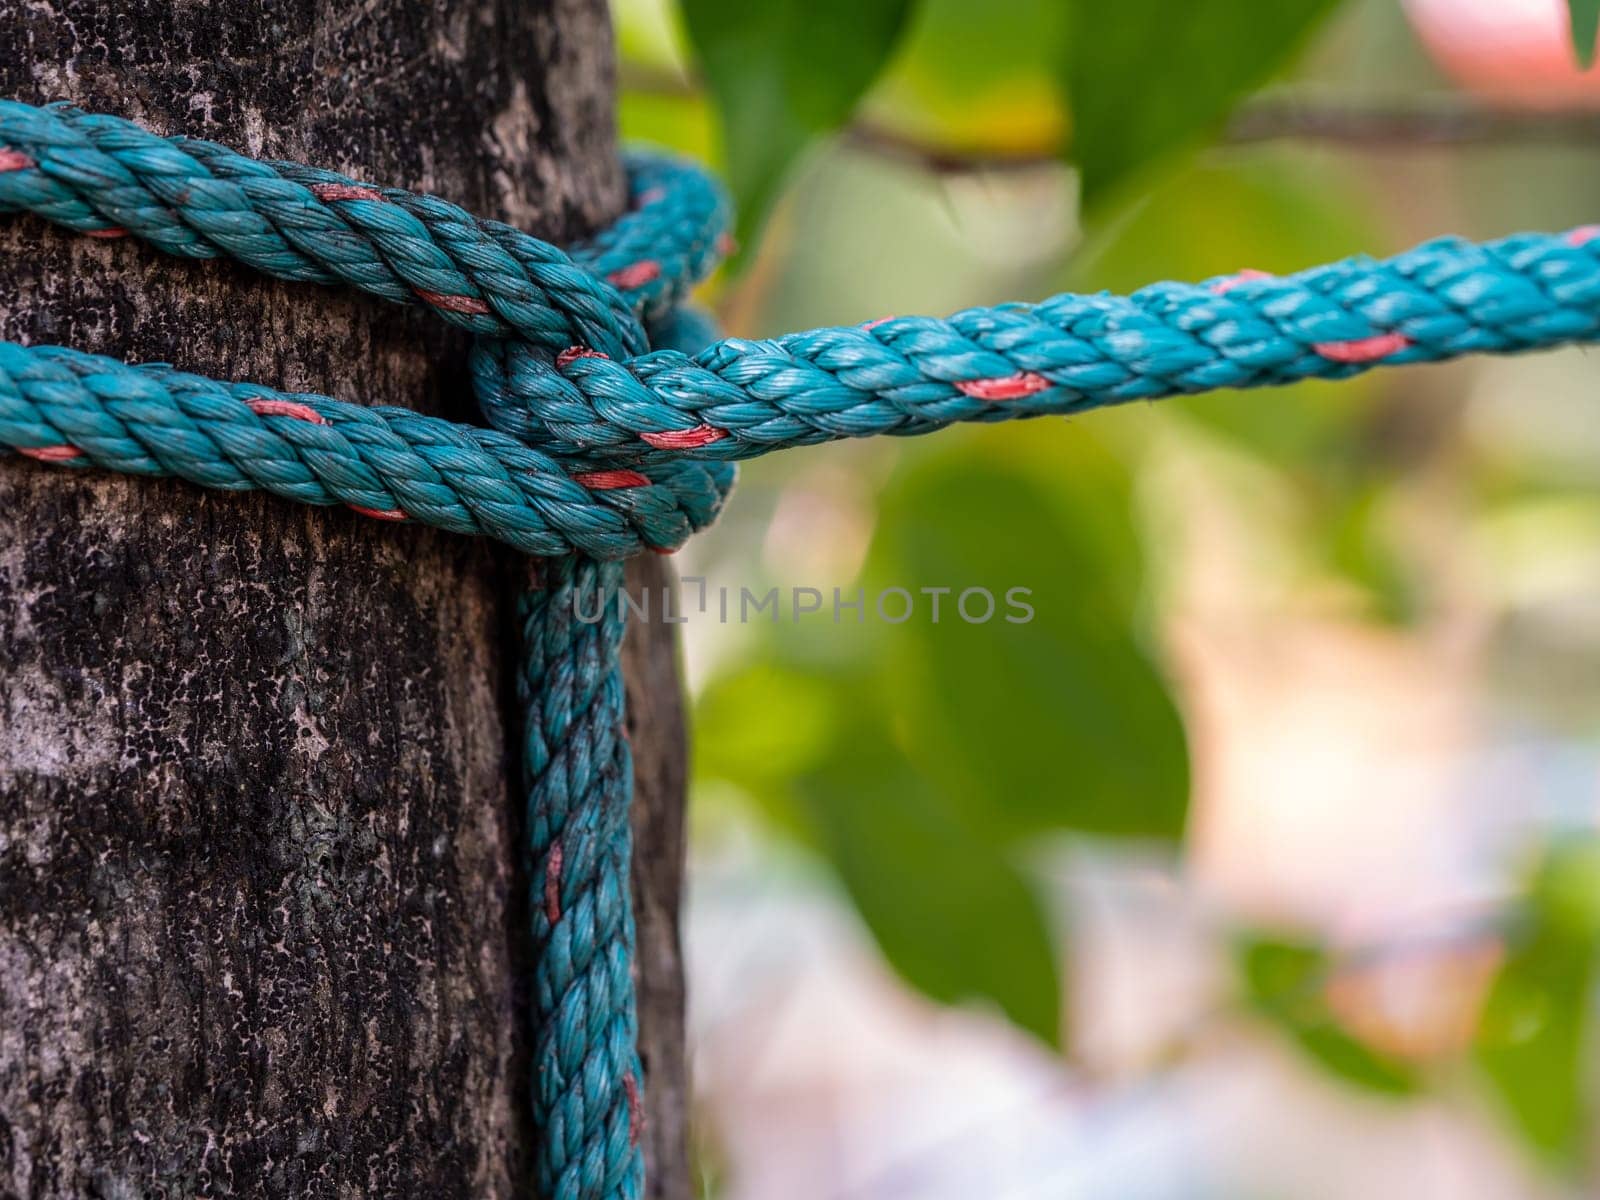 The nylon rope was tightly tied to the big tree by Satakorn